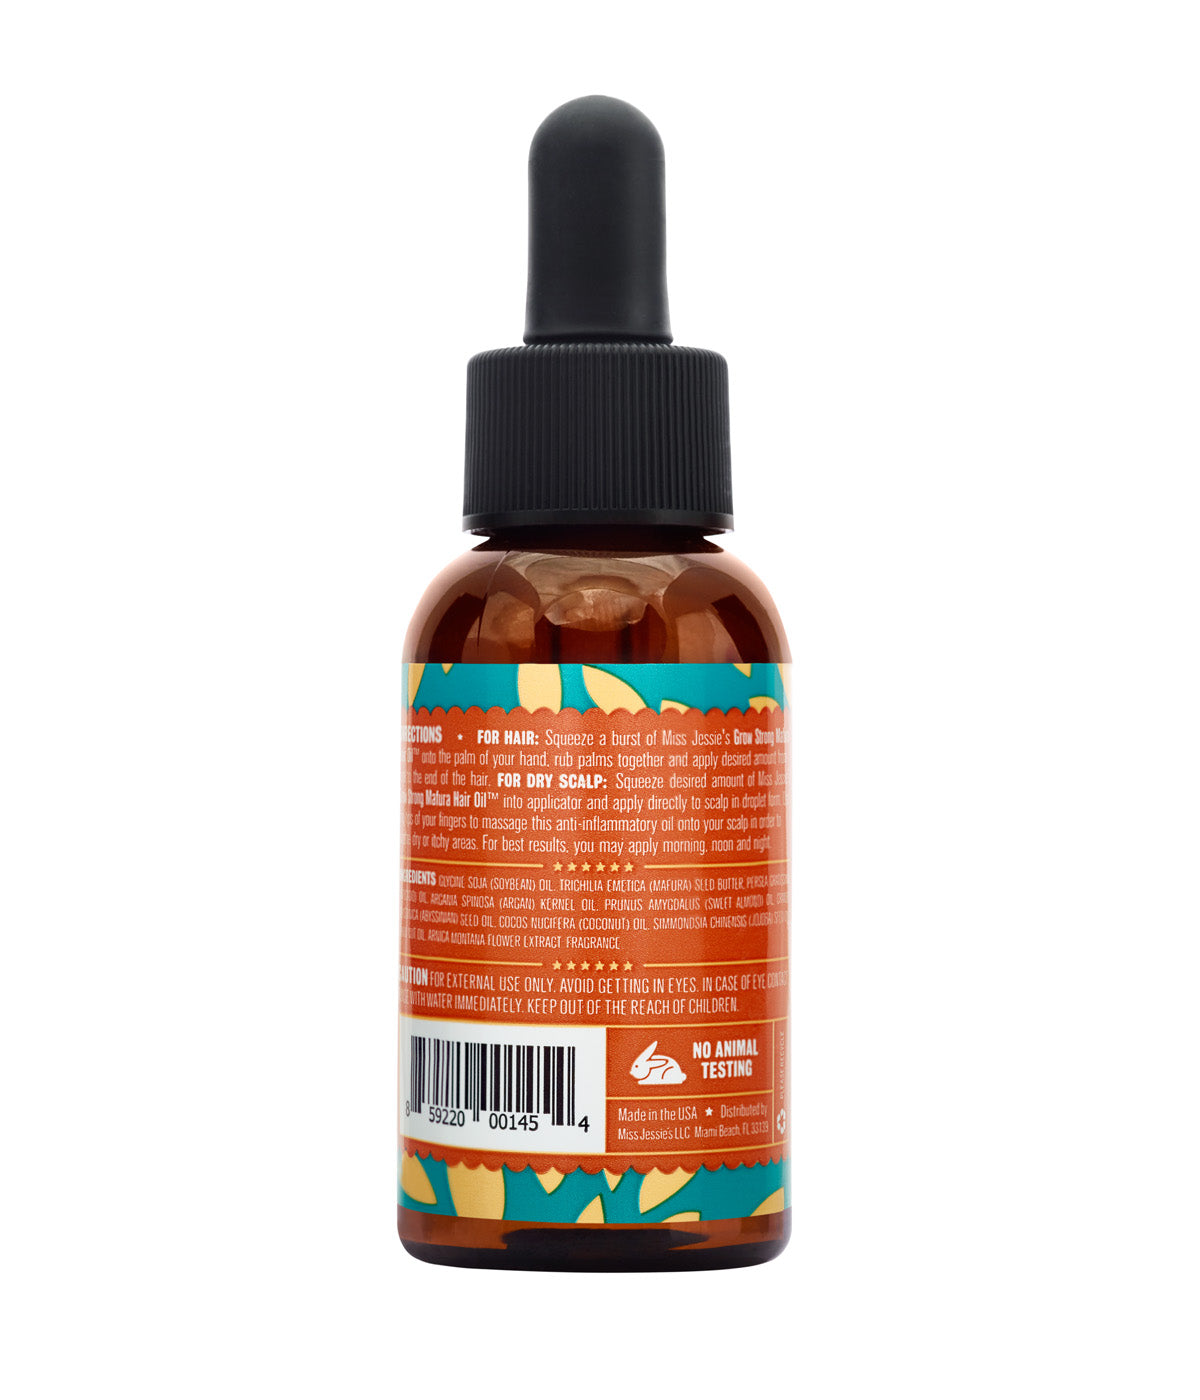 Grow Strong MAFURA - Natural Hair Growth Oil | Miss Jessie's Products